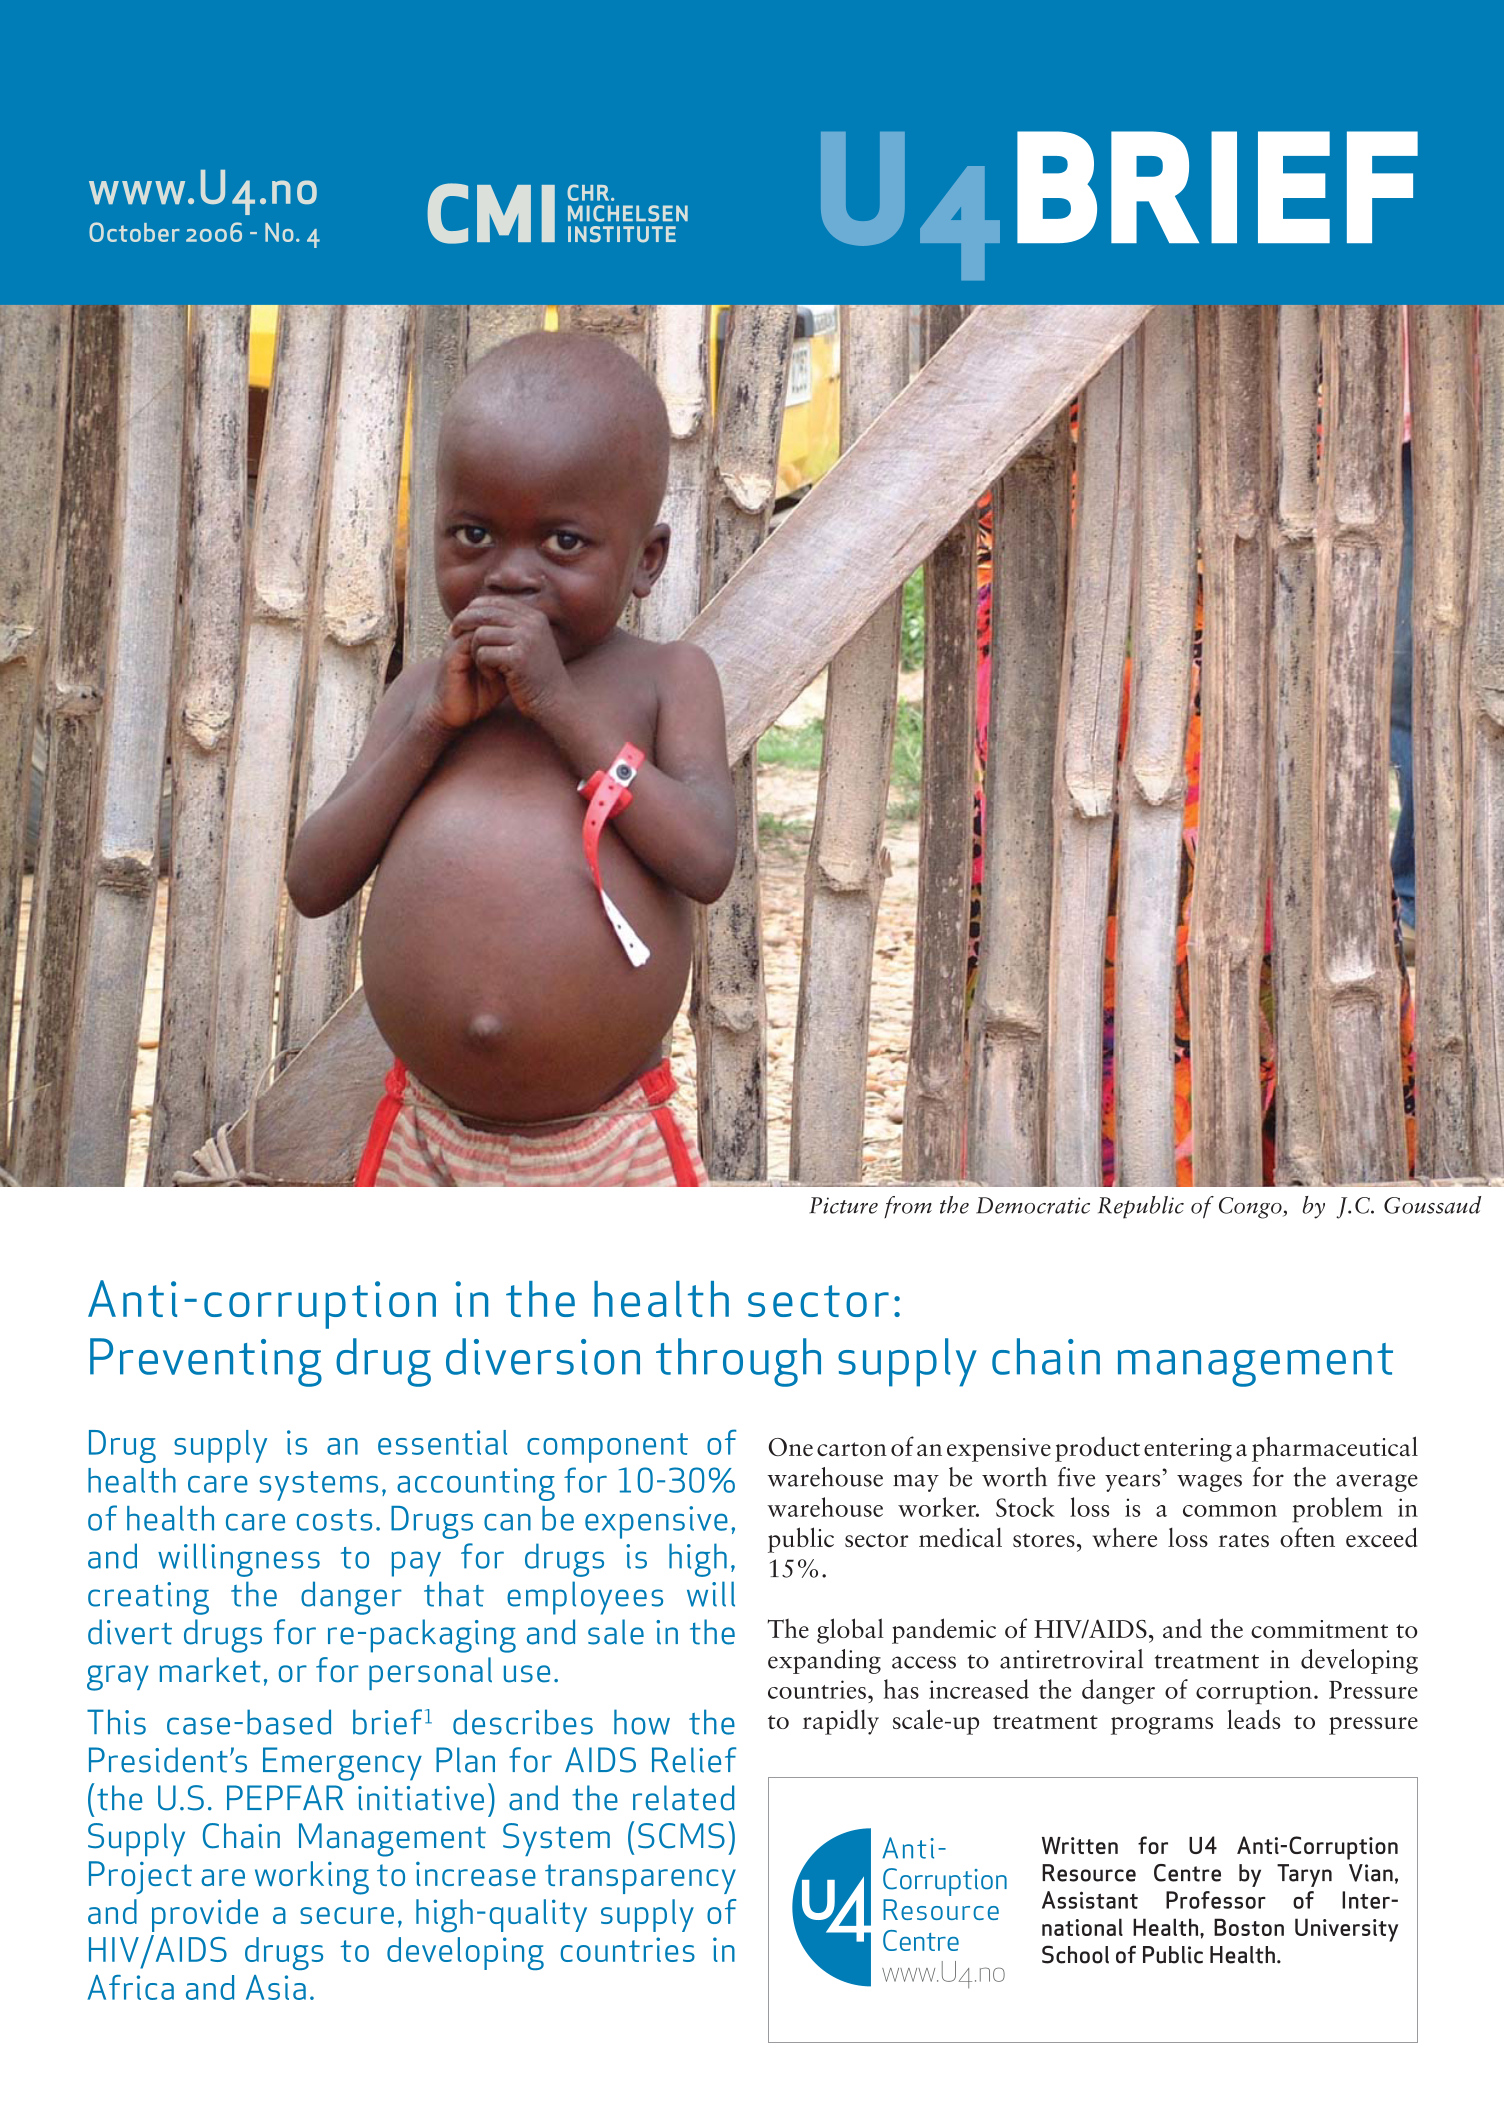 Anti-corruption in the health sector: Preventing drug diversion through supply chain management 